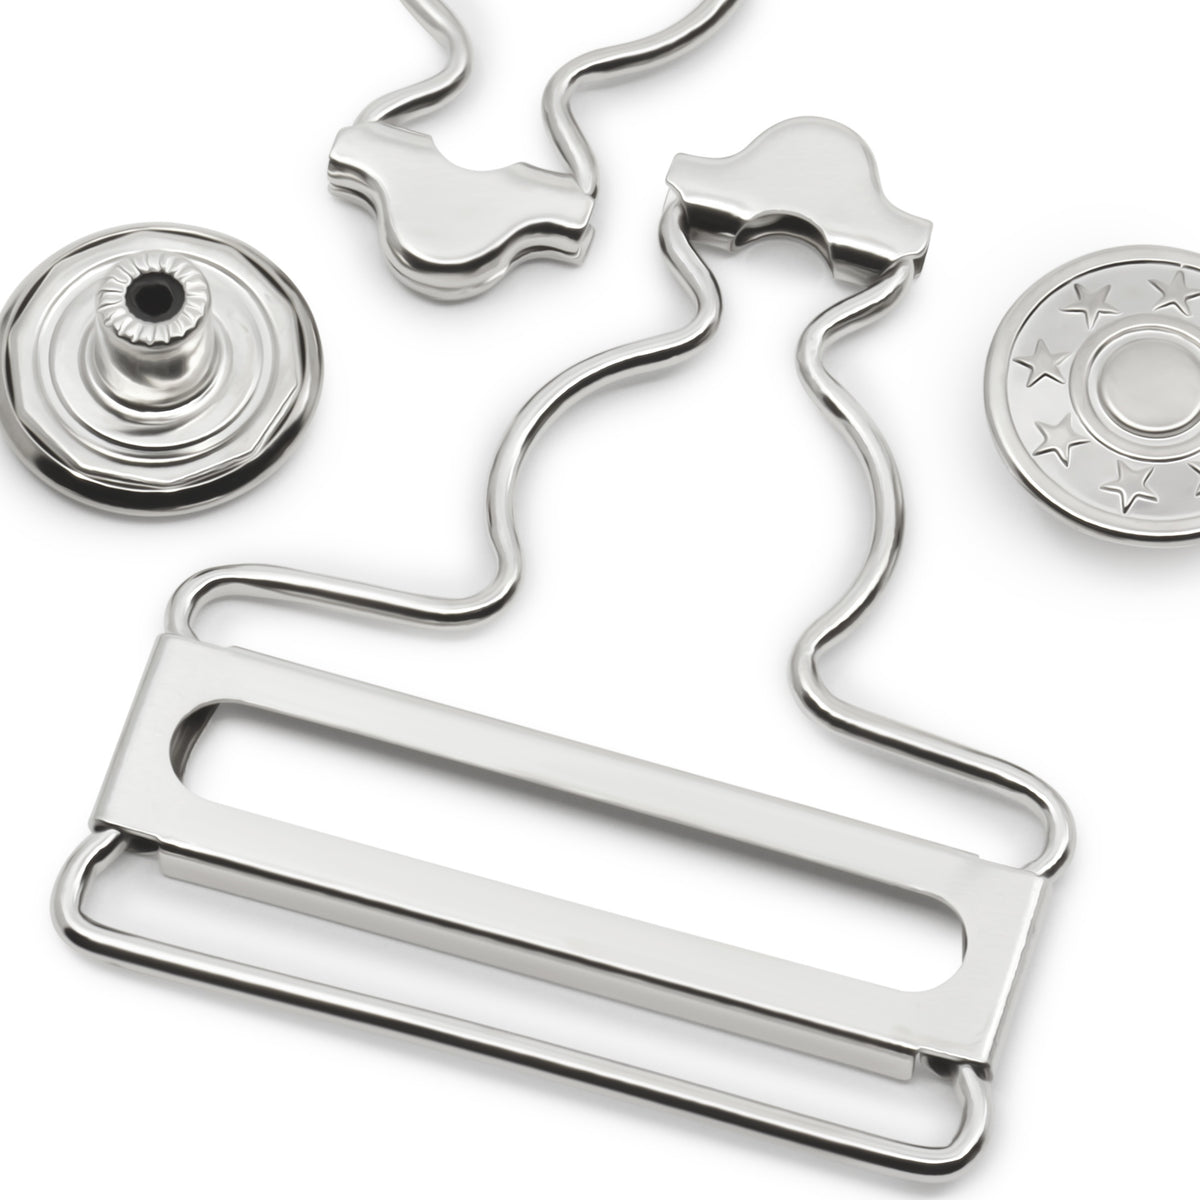 Dritz Overall Buckles for 1-5/8 Straps 2/Pkg-Nickel